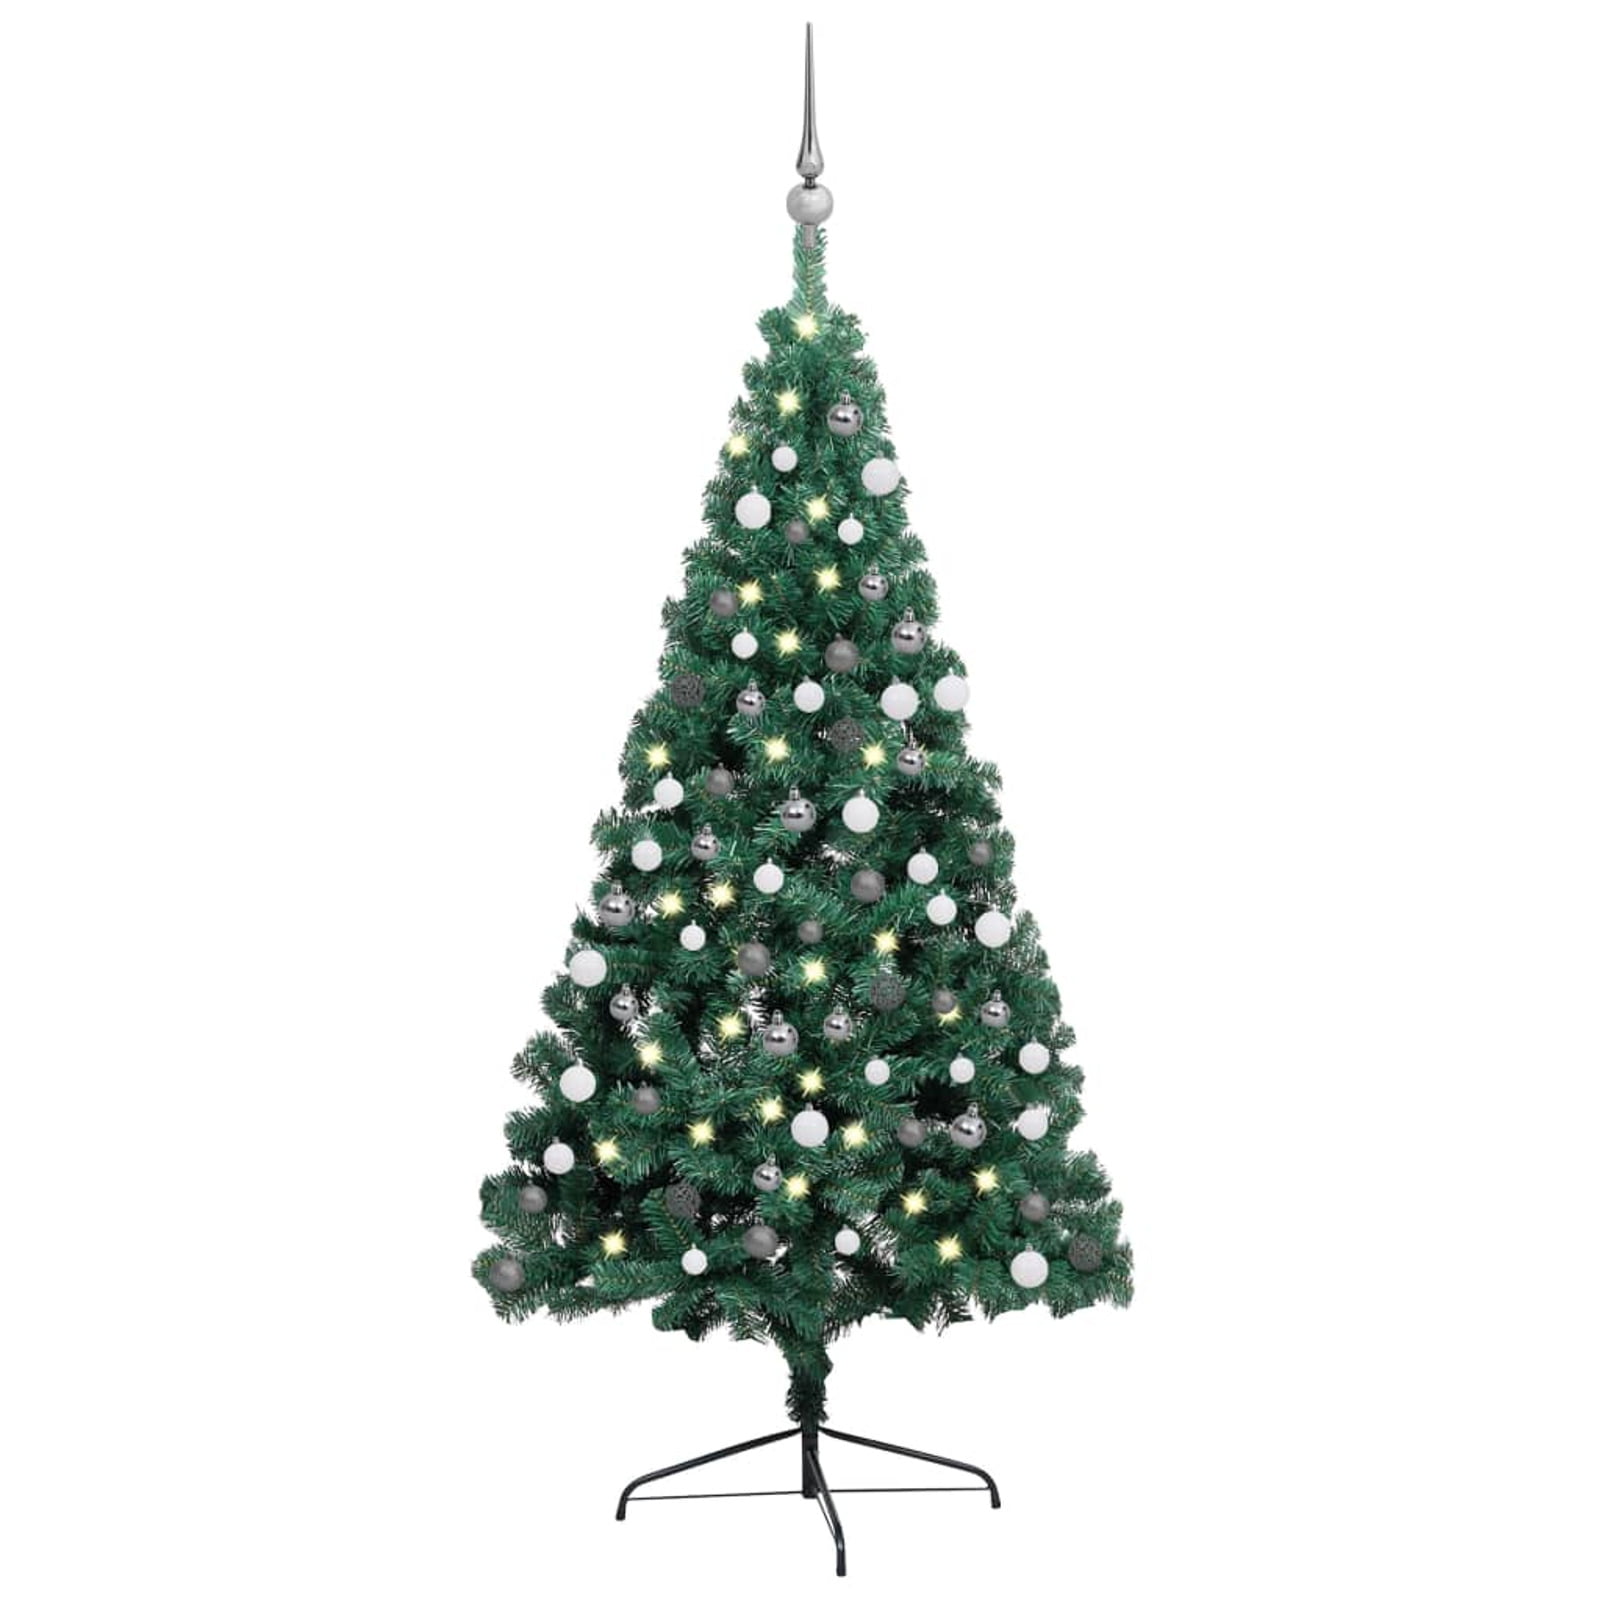 Details about   6ft Christmas Tree Pre Lit Nordic Spruce Green Xmas Presents Lights 